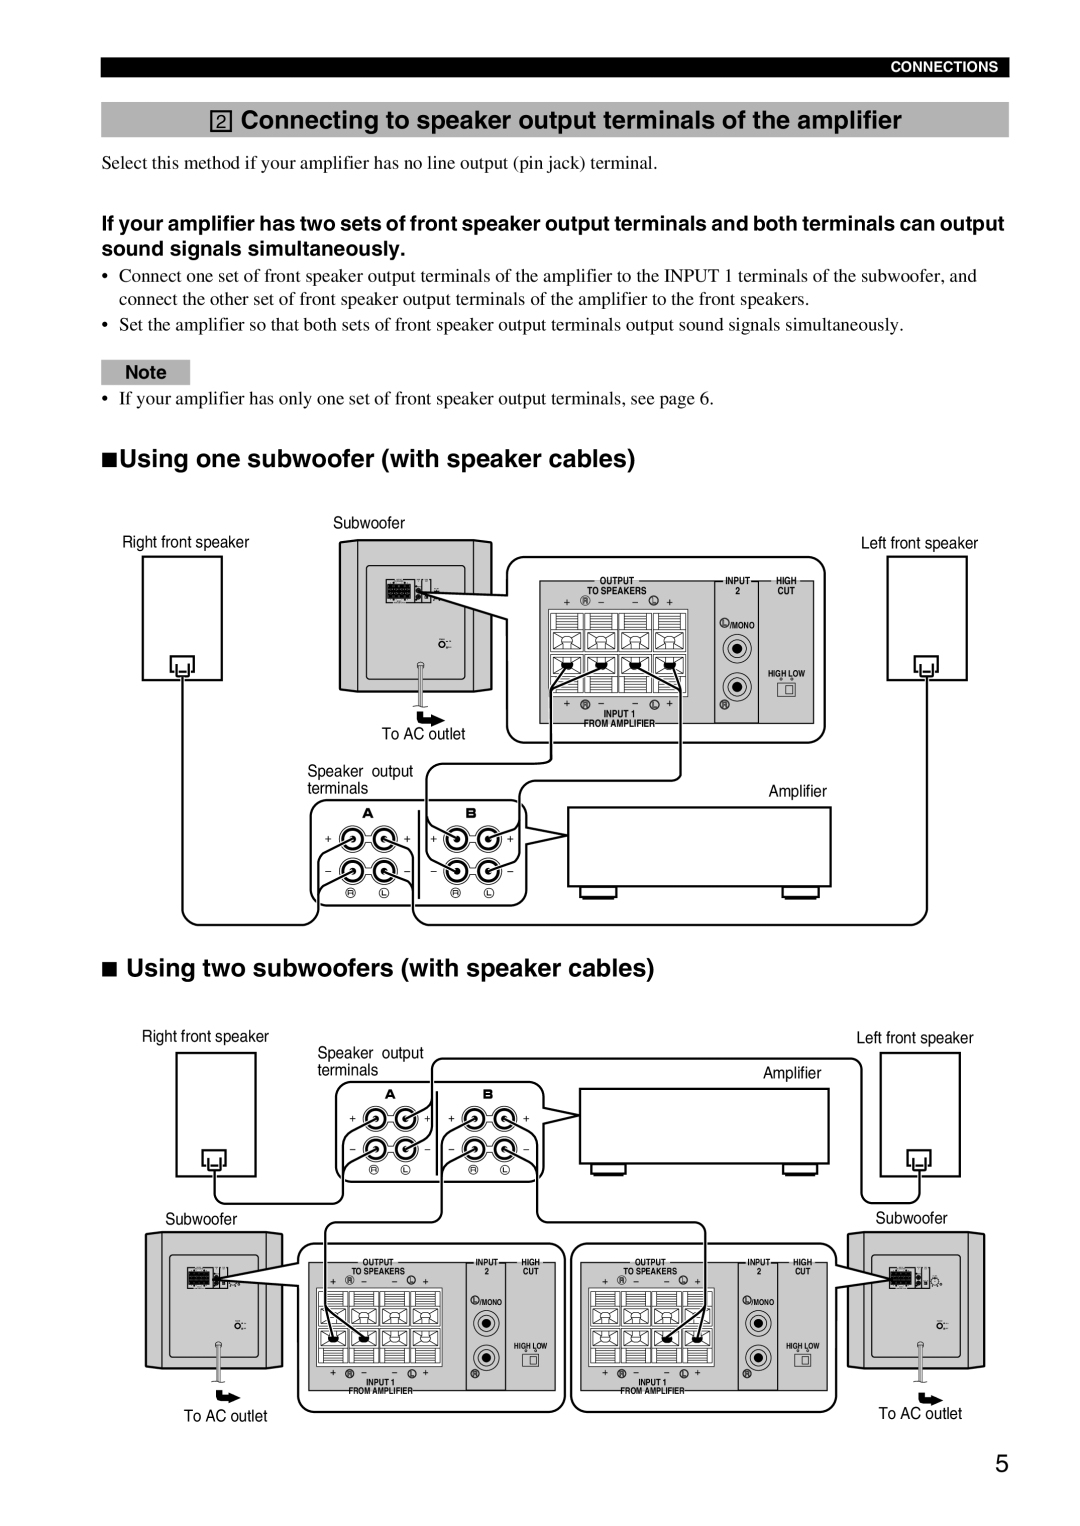 Yamaha HTR-5940 AV owner manual Using one subwoofer with speaker cables, Using two subwoofers with speaker cables 